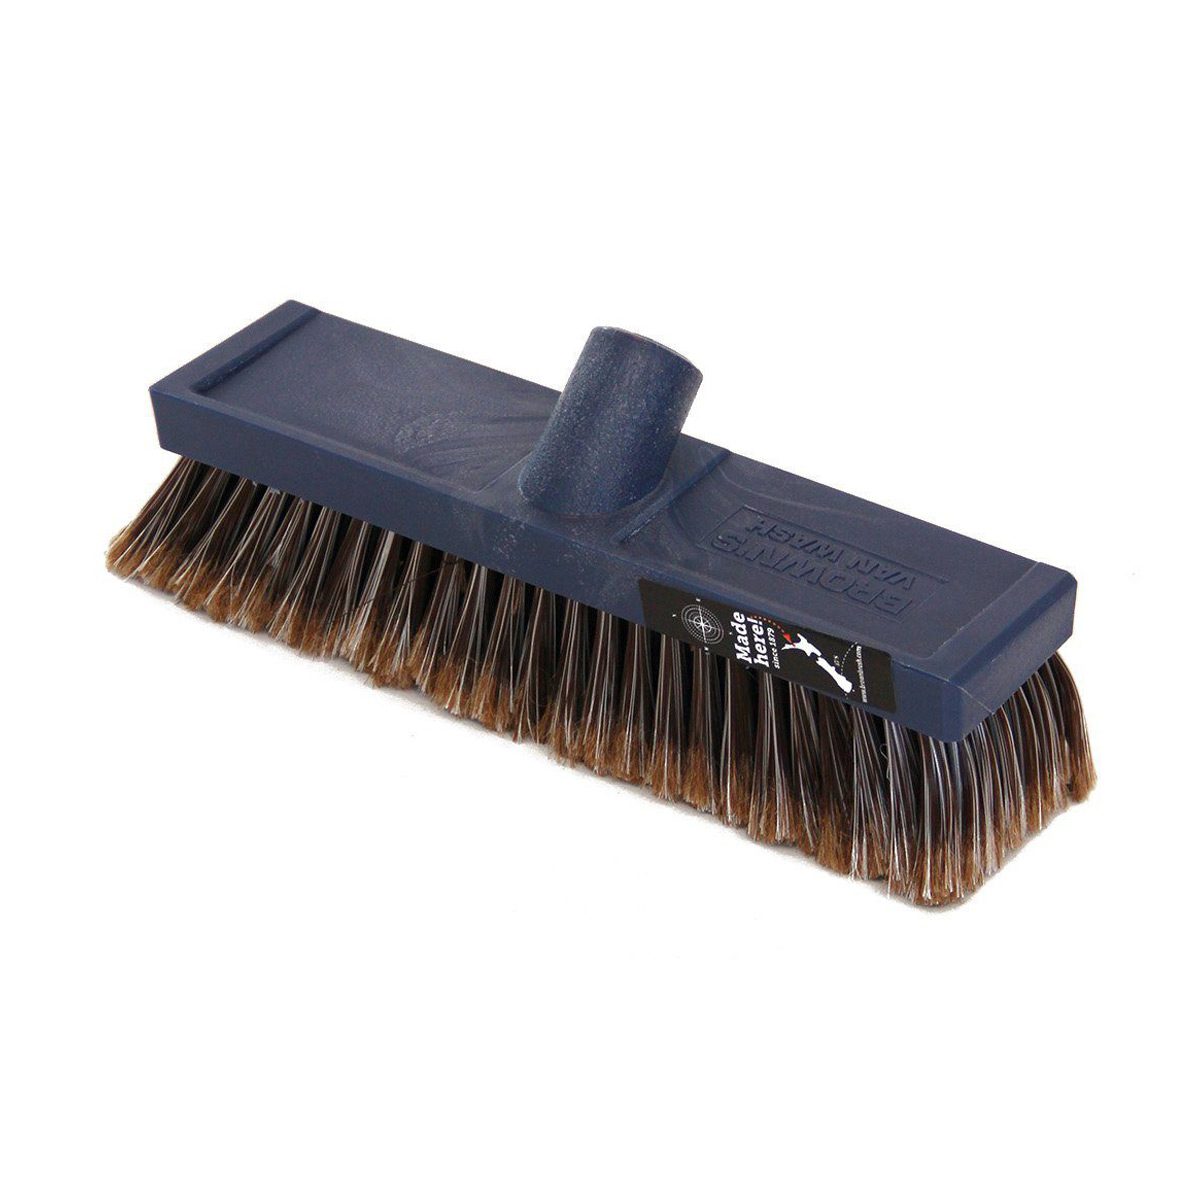 cleaning-equipment-brushware-deluxe-fill-van-wash-brush-head-250mm-wide-comes-with-plastic-stock-and-soft-synthetic-mix-bristle-vjs-distributors-RBAY350